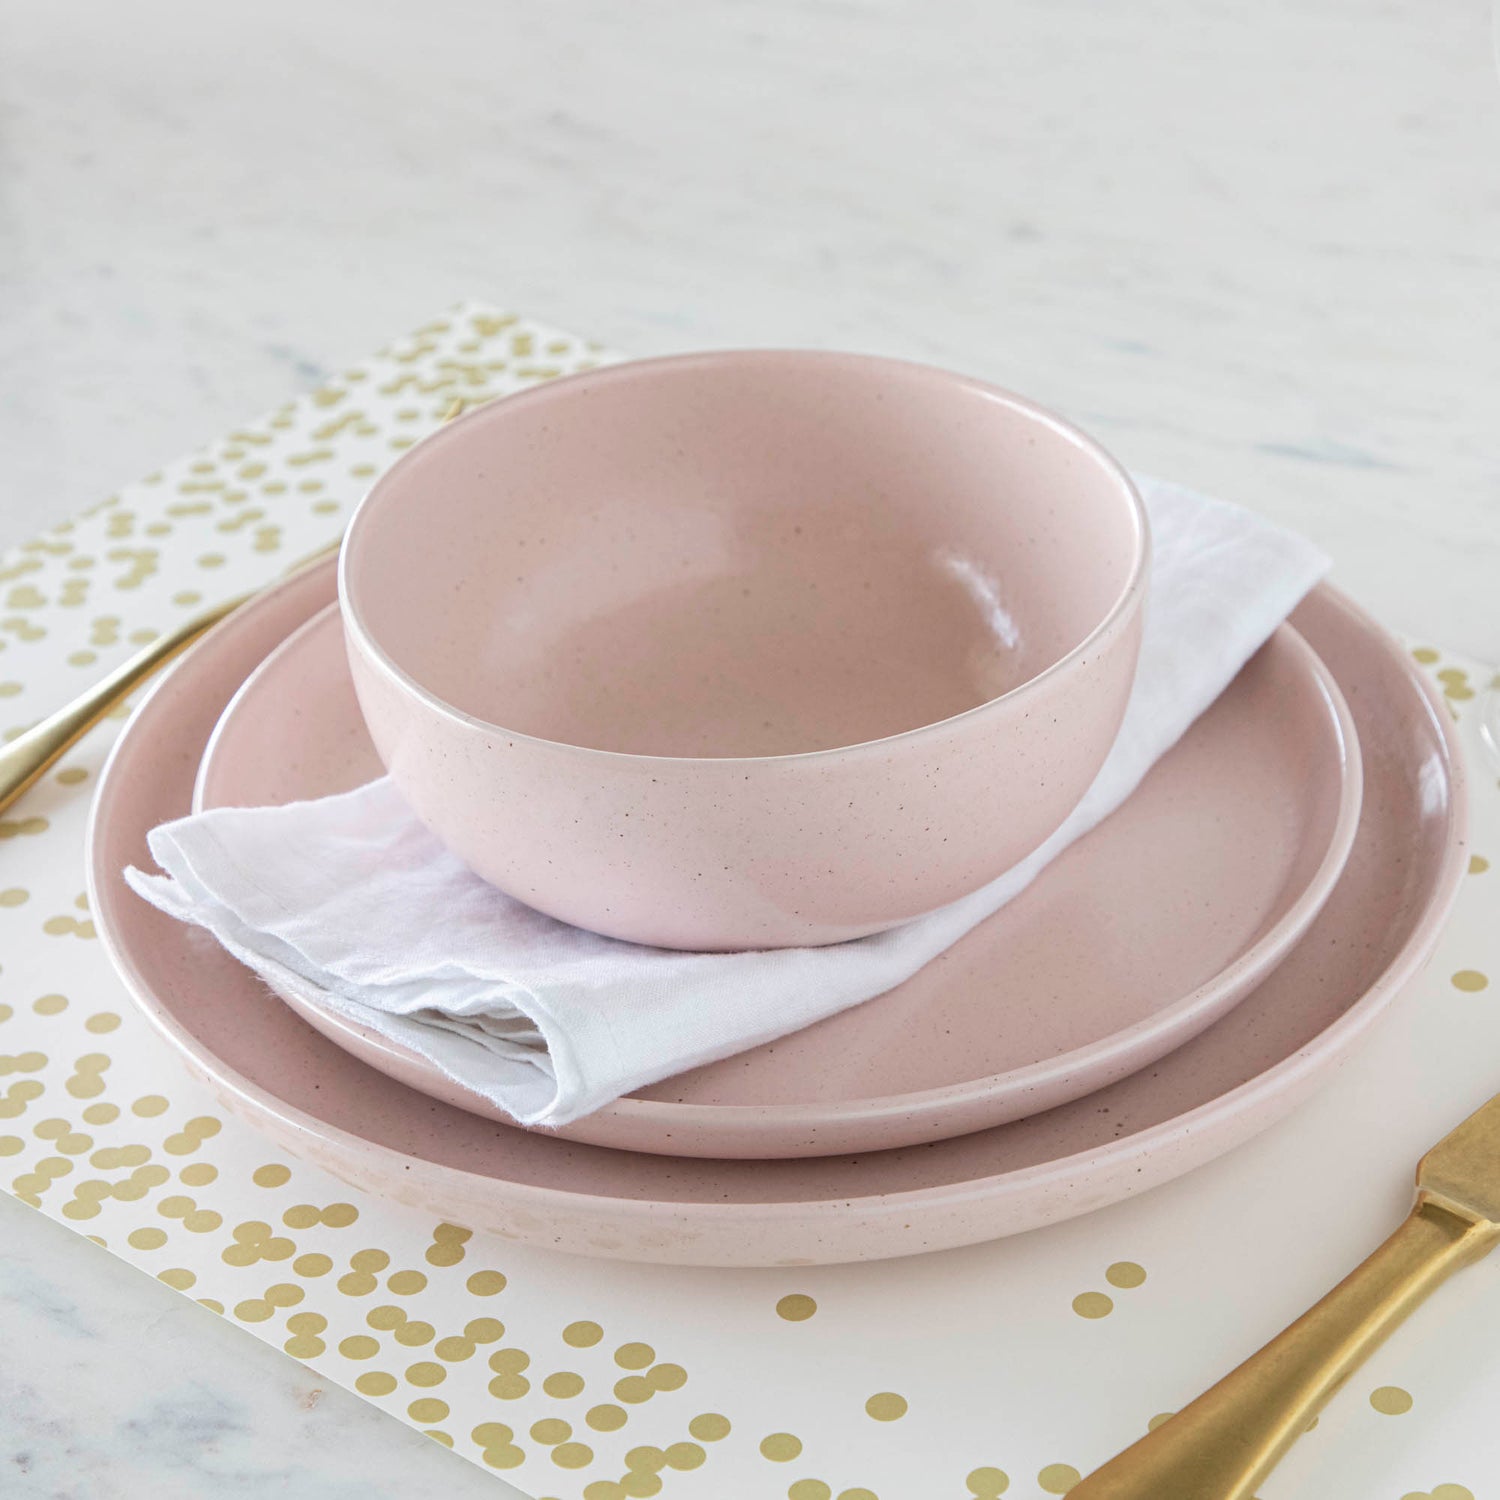 A fine stoneware Casafina Living Pacifica Marshmallow dinner set with a matte finish and gold polka dots on a table.